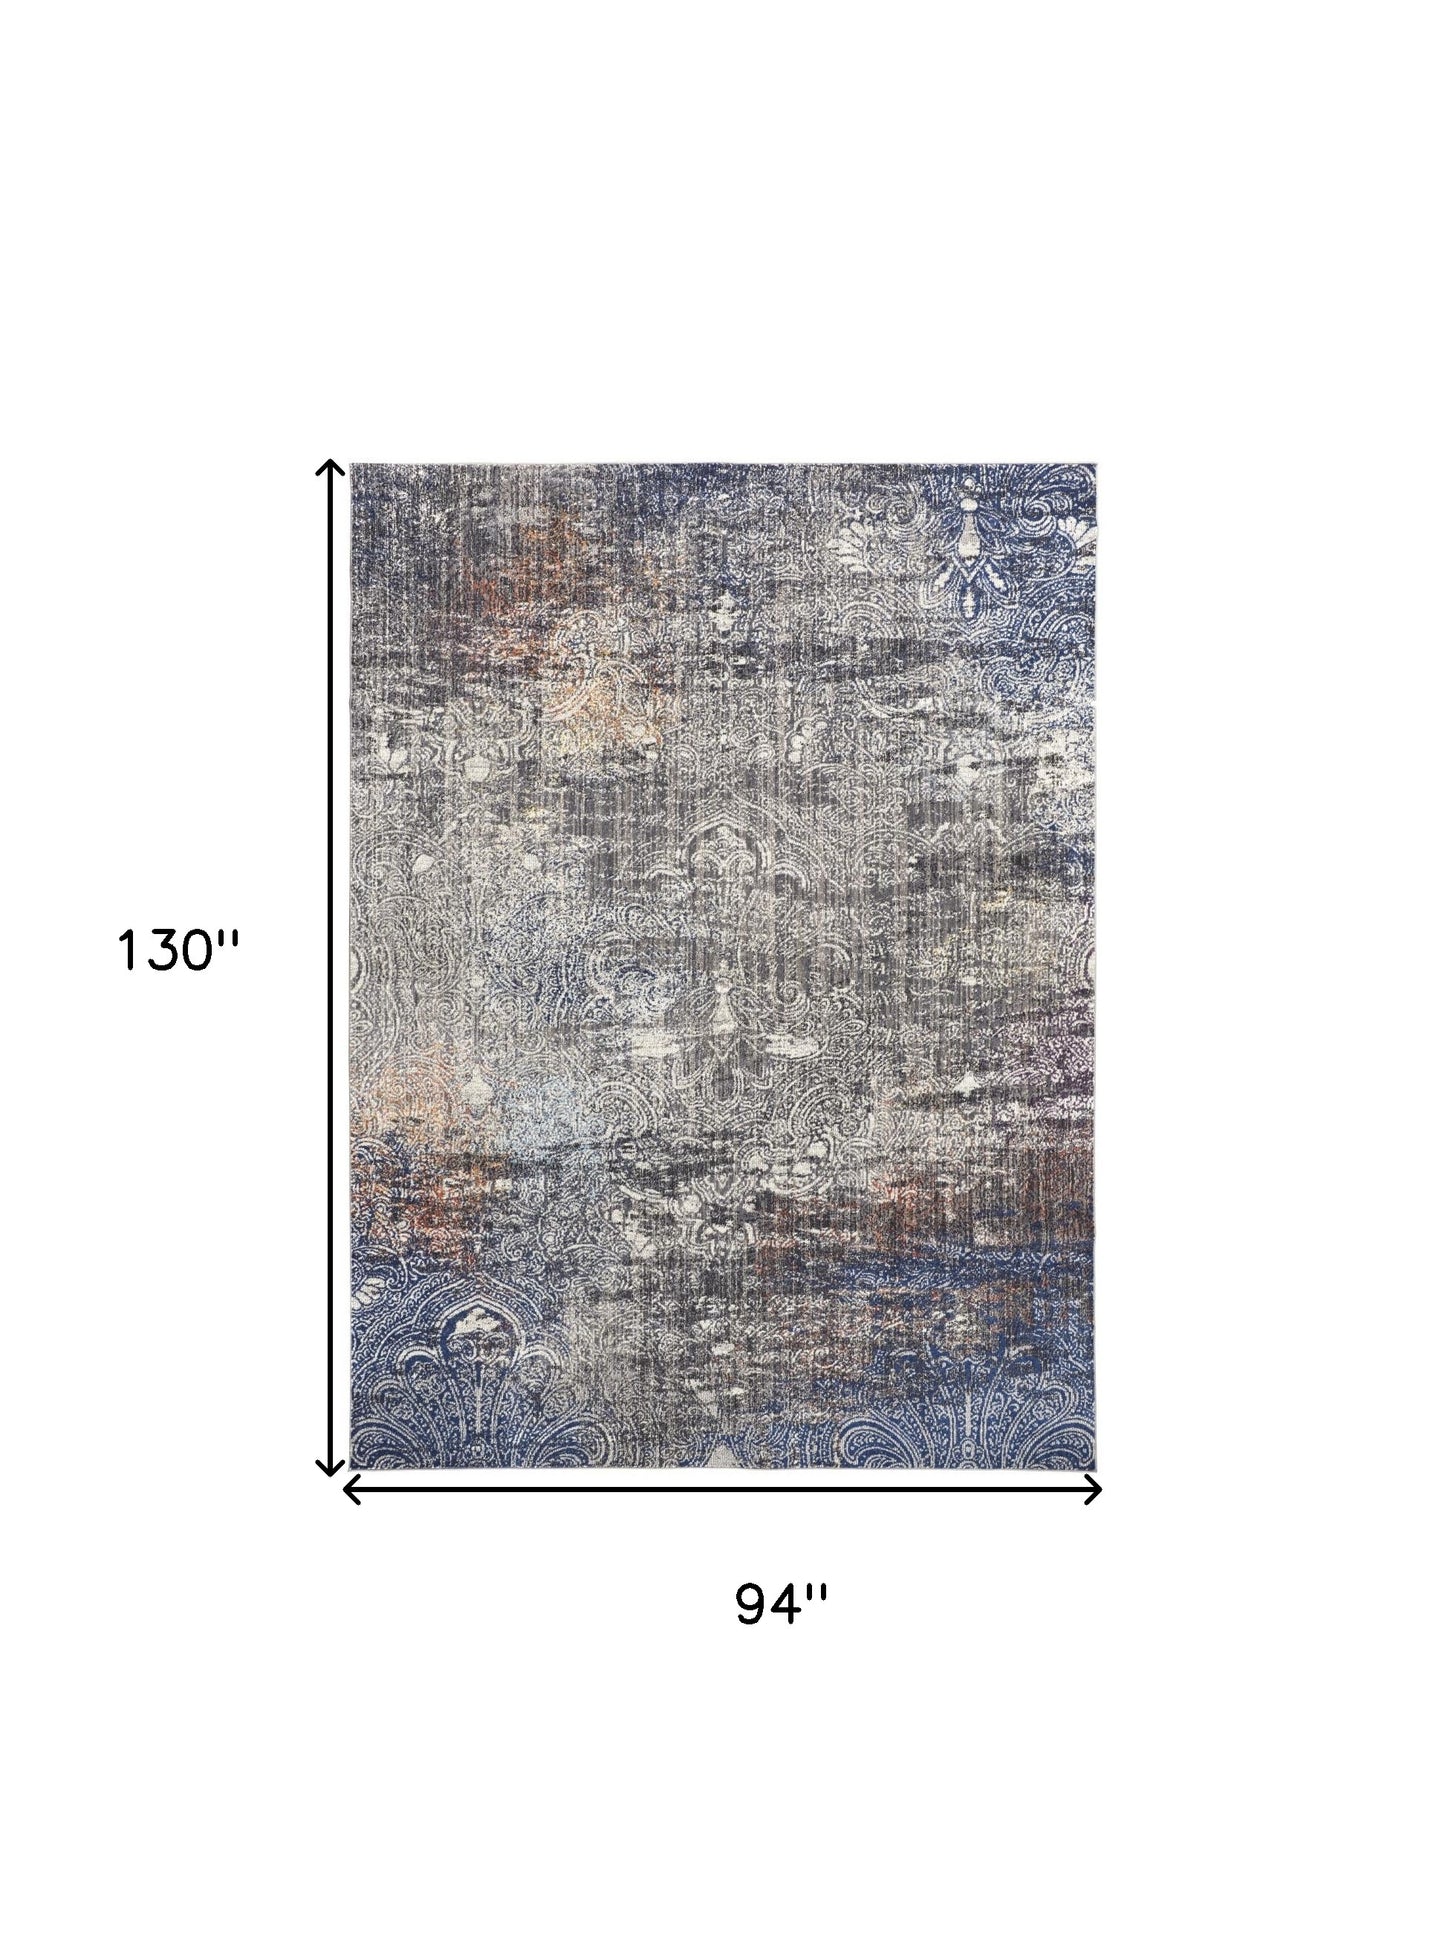 7' X 10' Taupe Blue And Ivory Abstract Power Loom Distressed Stain Resistant Area Rug